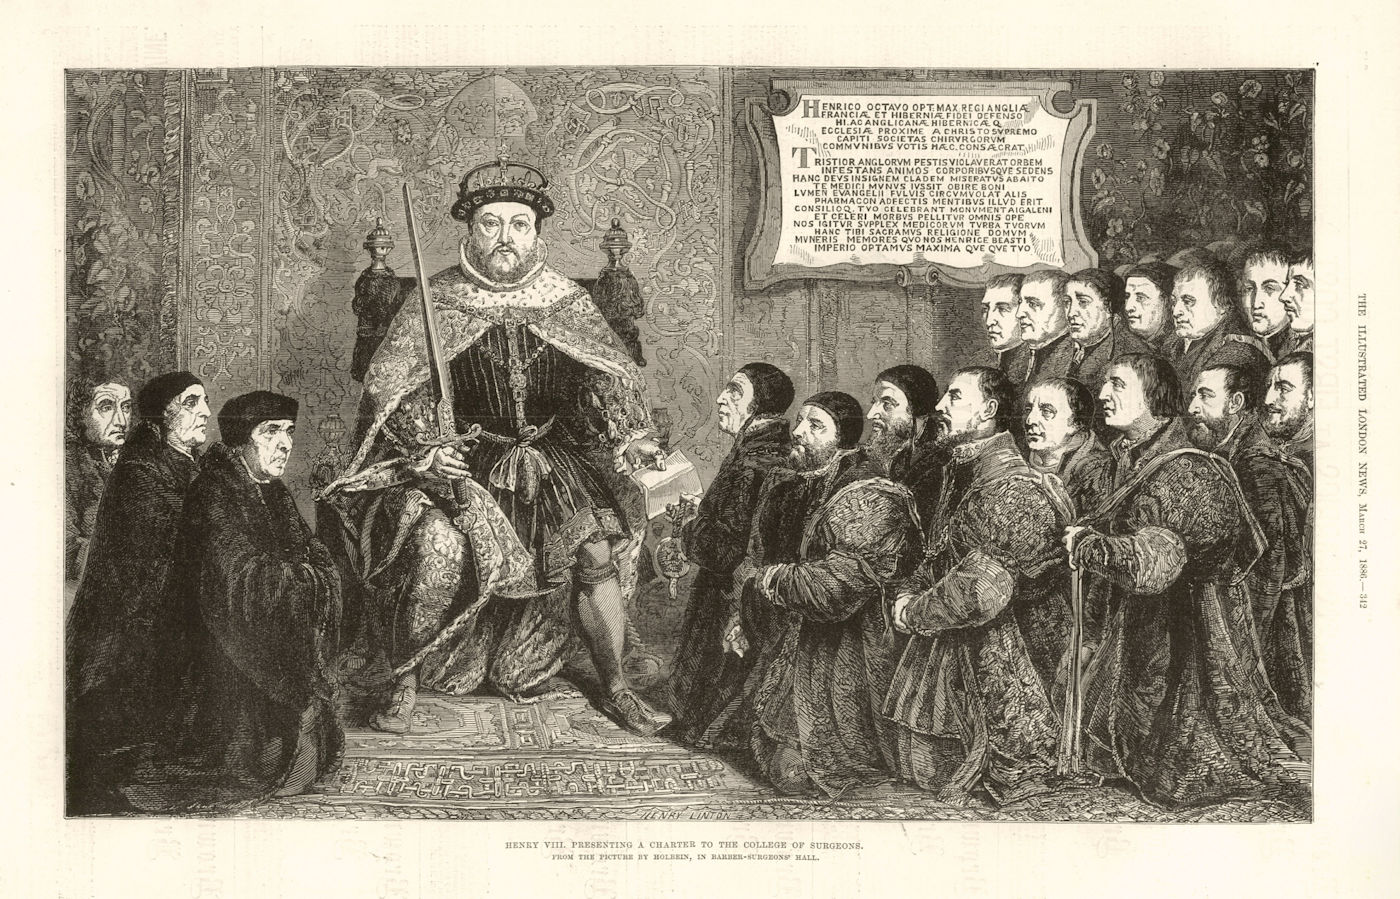 Henry VIII presenting a charter to the College of Surgeons. London. Medical 1886